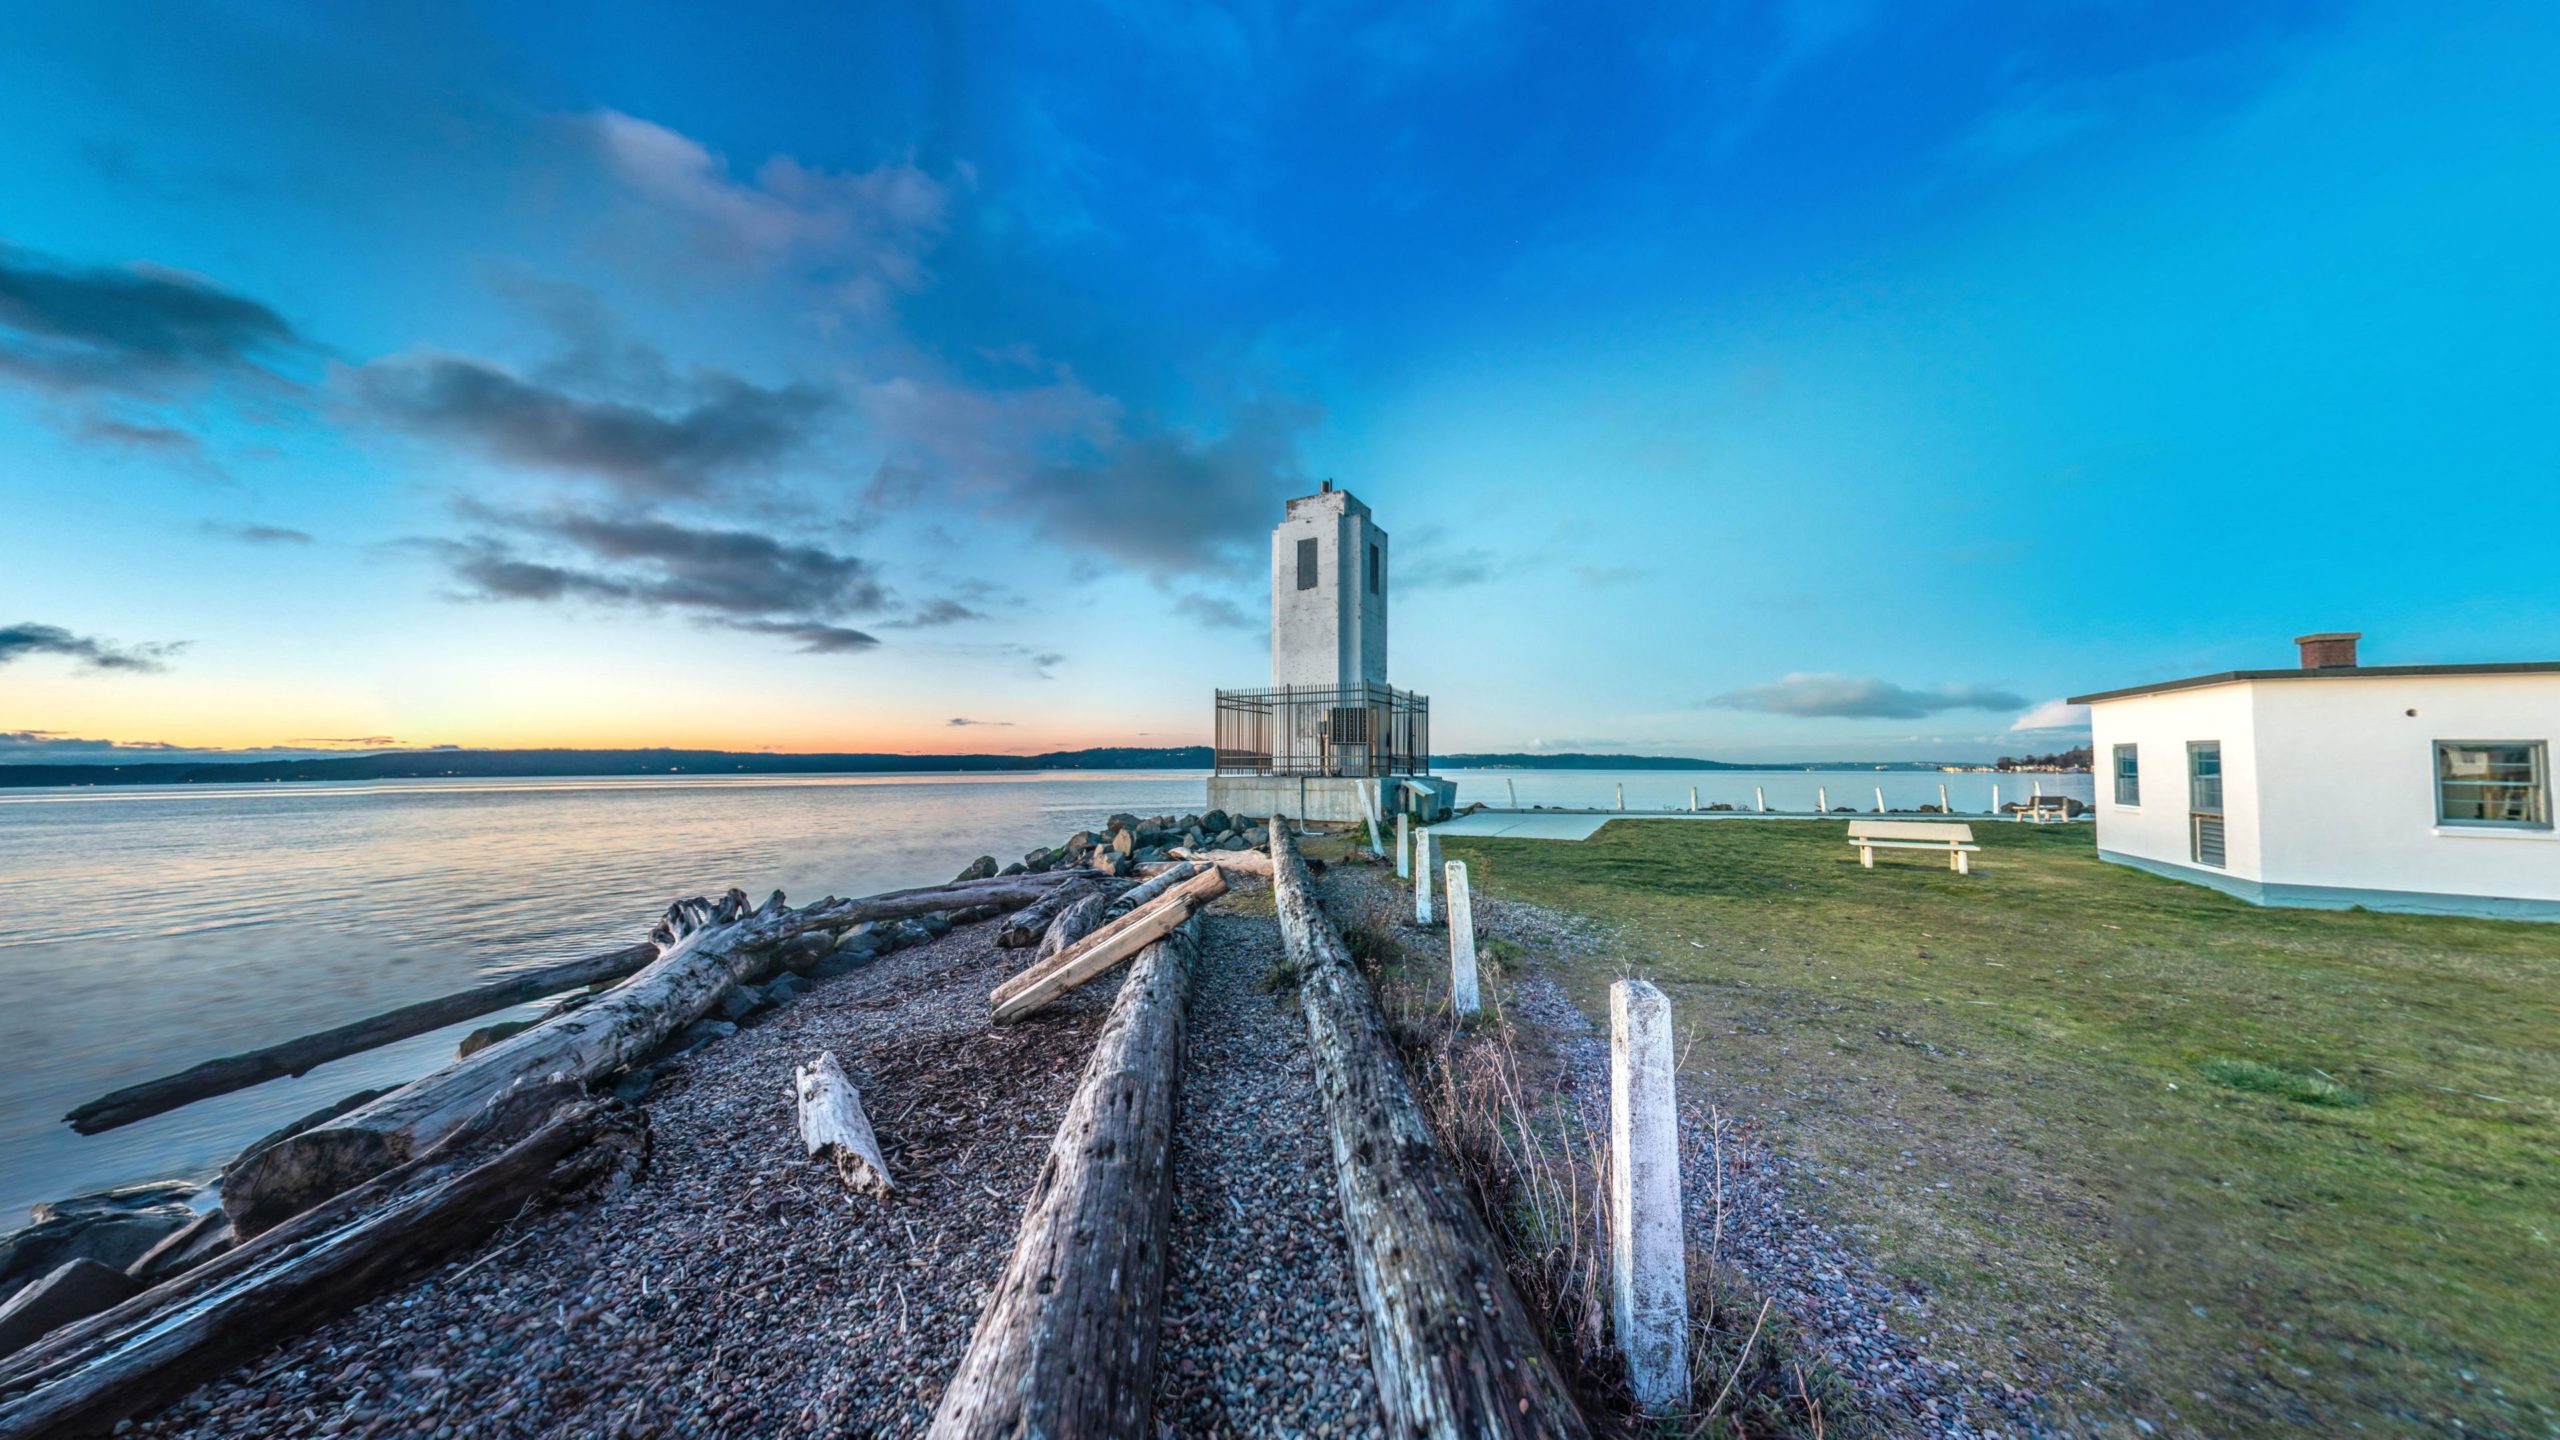 360° Photos & Virtual Tour of Browns Point Lighthouse. The Browns Point Lighthouse is a lighthouse located near Tacoma on Browns Point at the east entrance to Puget Sound’s Commencement Bay, Pierce County, Washington.